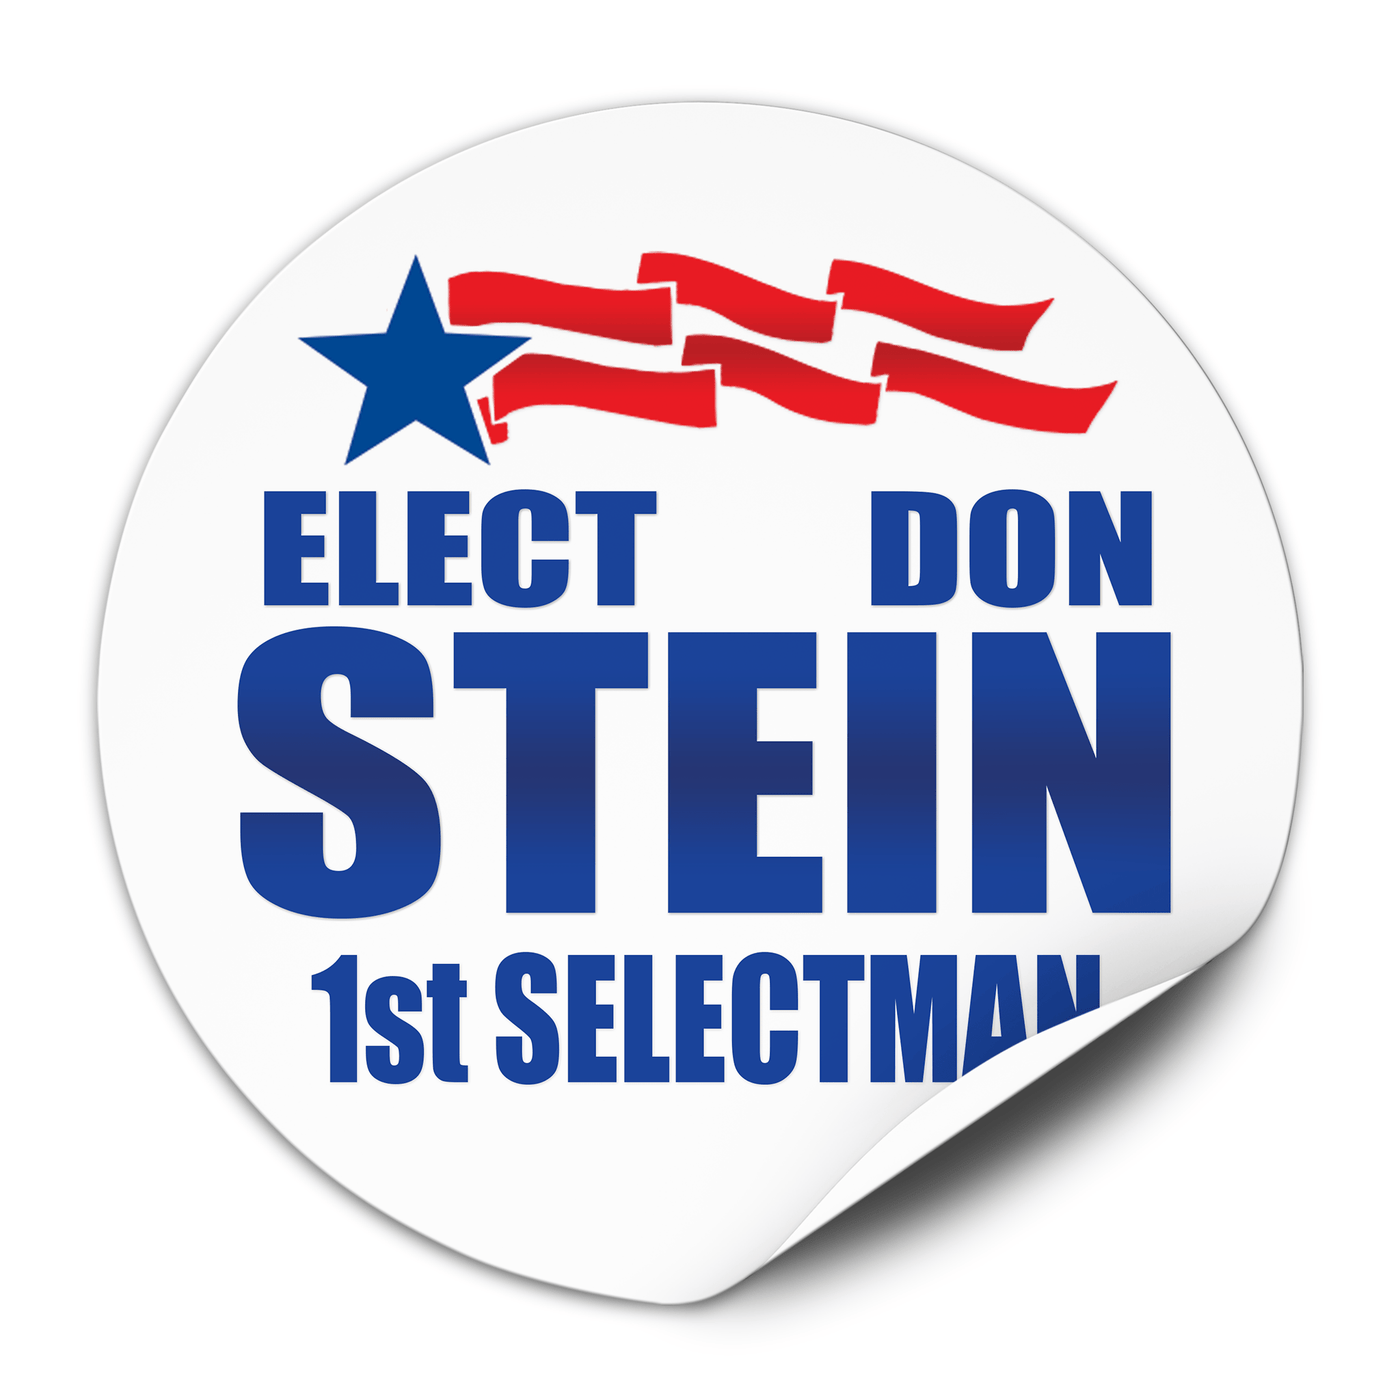 Political Campaign Sticker Template - PCS-108, paper with adhesive back, red streamers, blue star